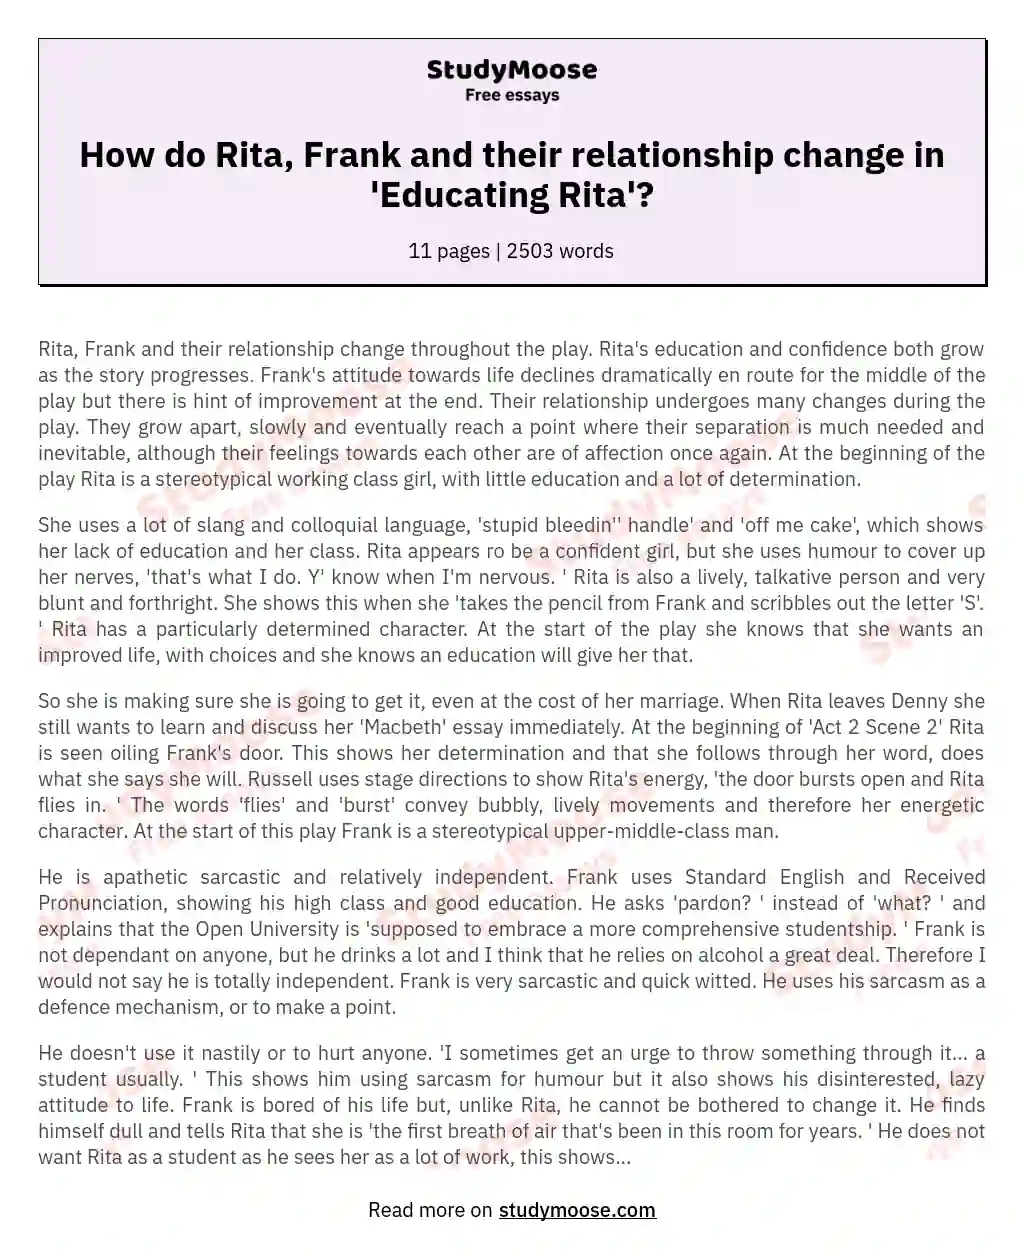 How do Rita, Frank and their relationship change in 'Educating Rita'?